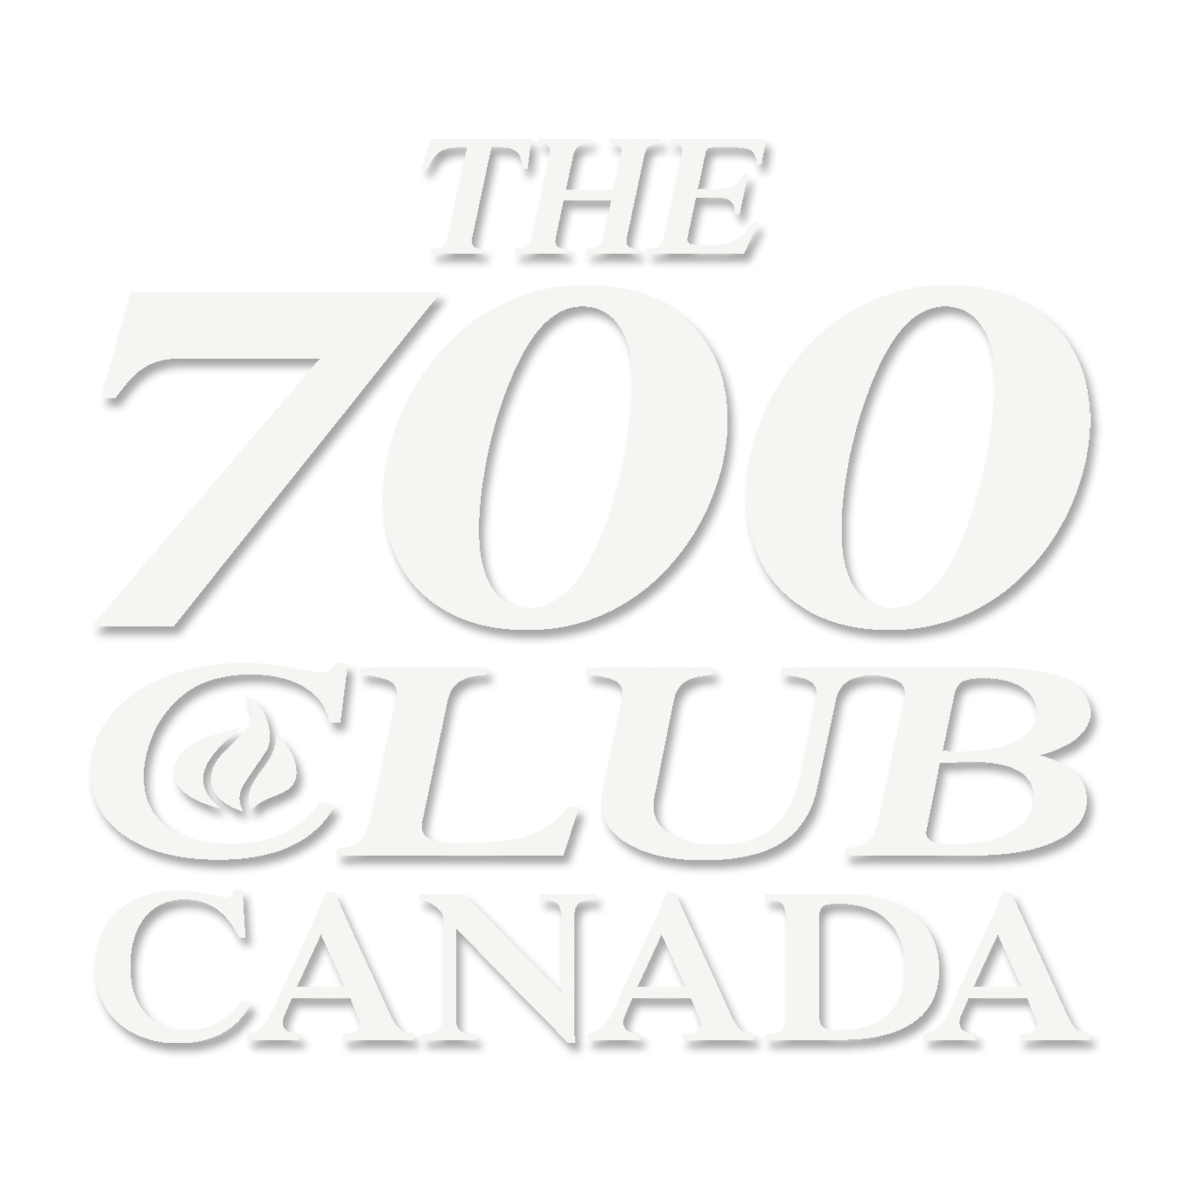 700 Club Canada | Our mission is to reach Canada with the love of God.